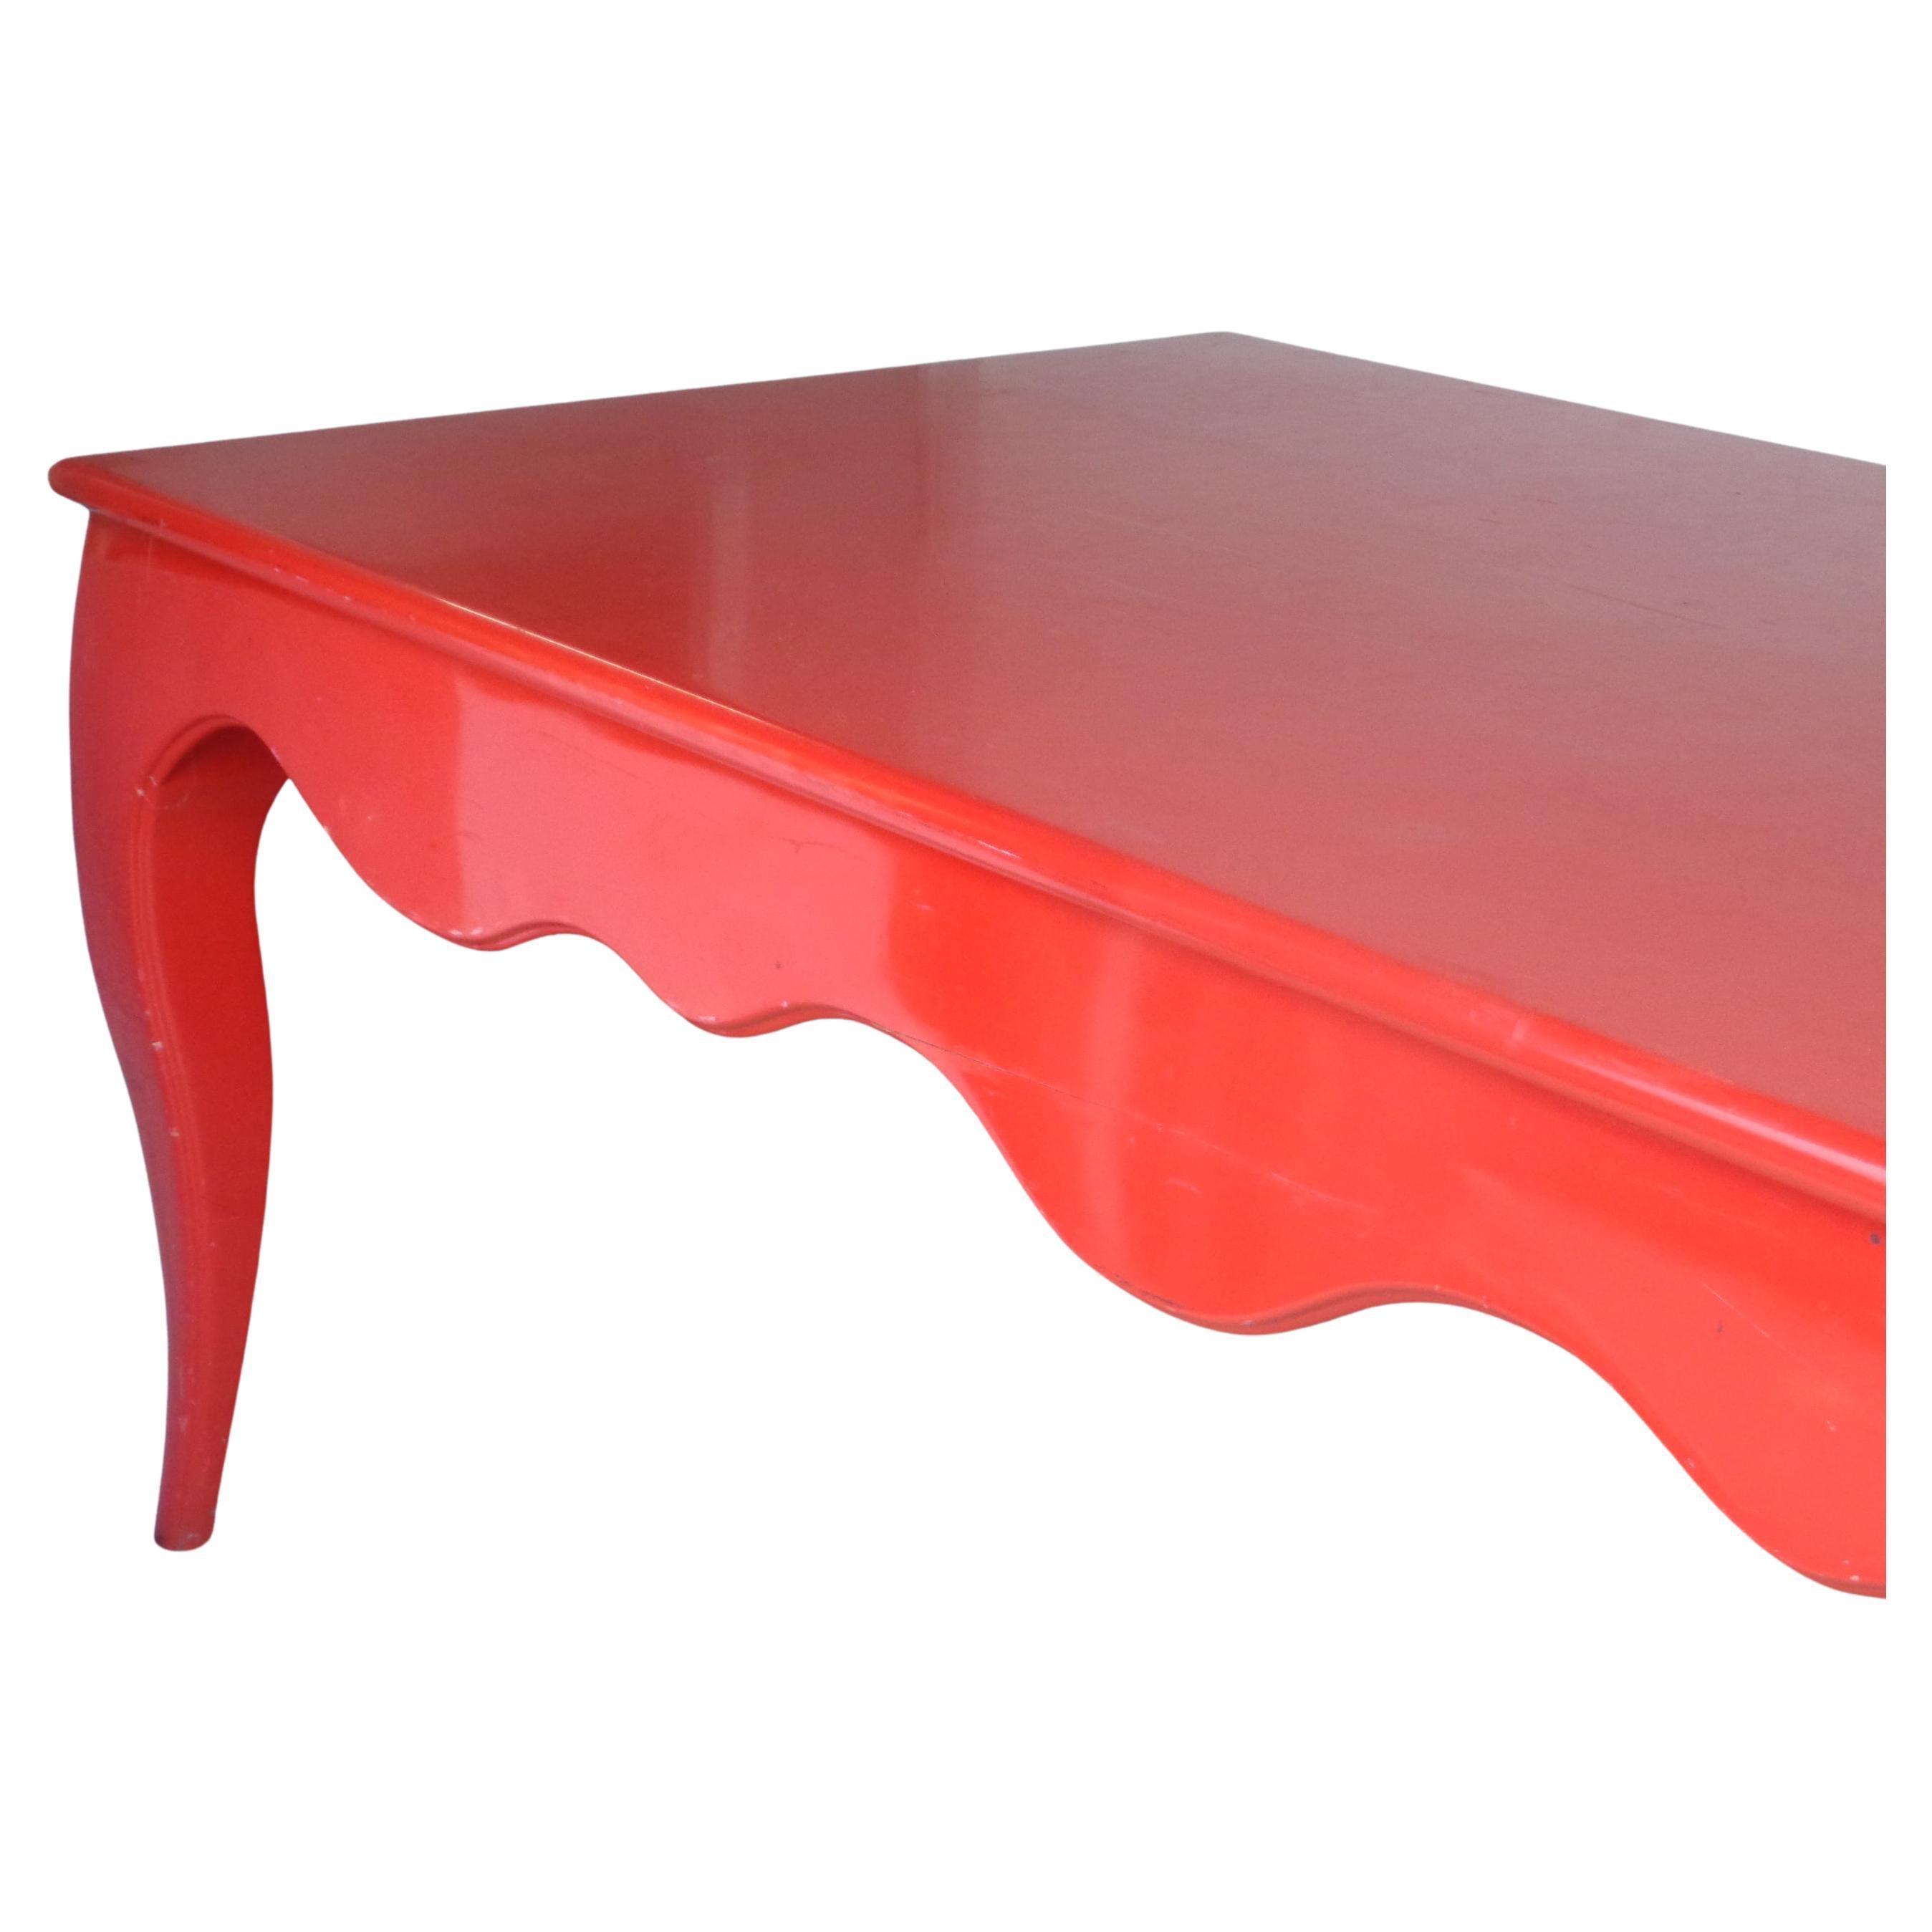 Large Red Lacquered Scallop Design Table style of Jean-Michel Frank, Circa 1970 For Sale 2